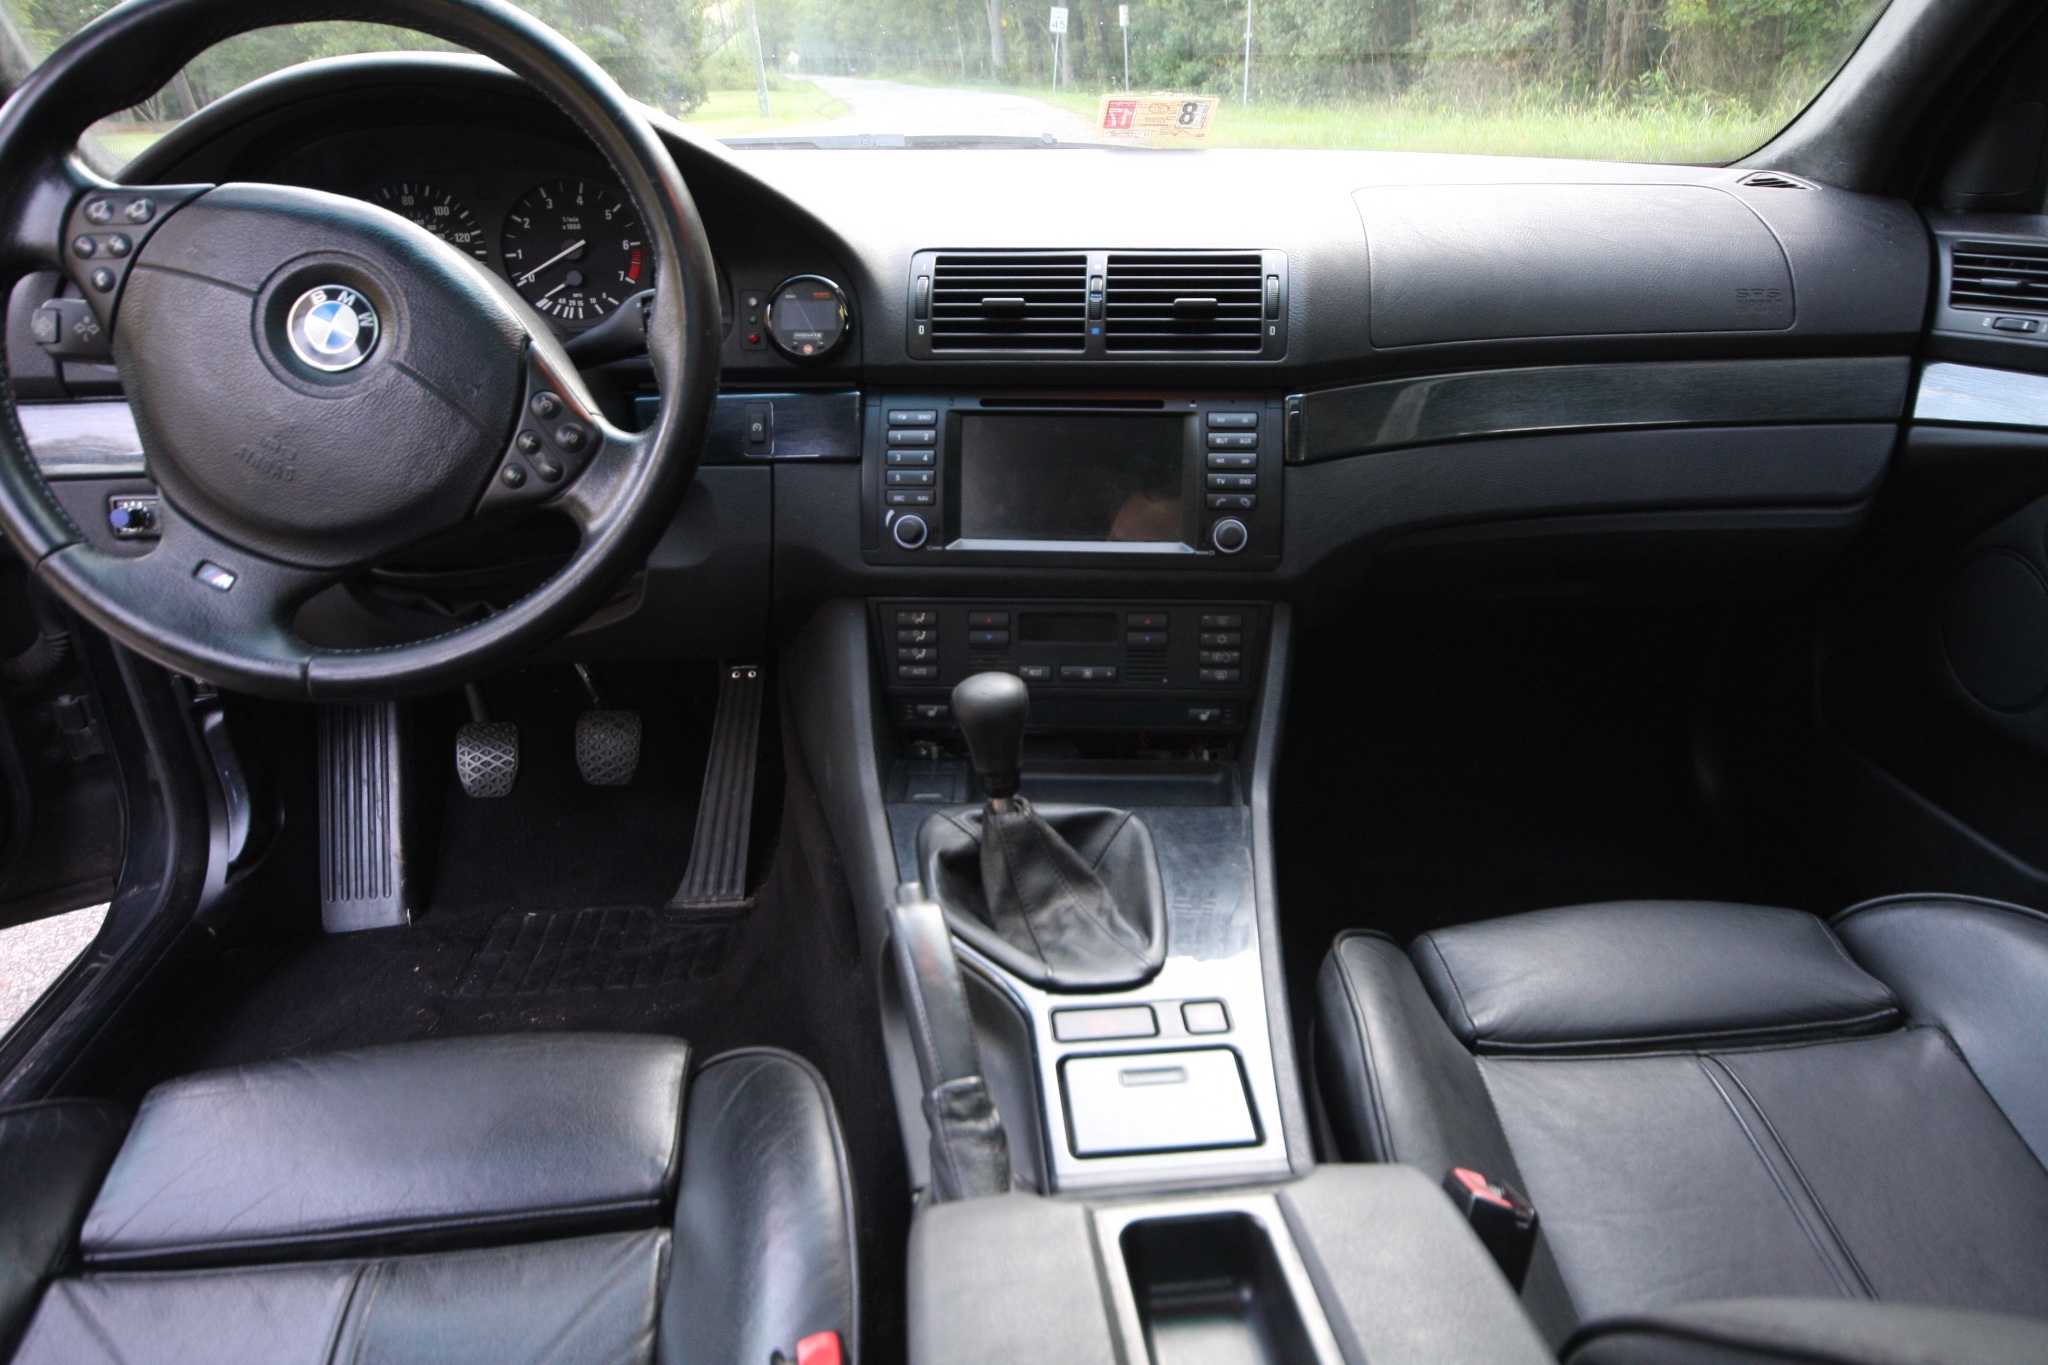 BMW 528i LS1 with an interior color swap.